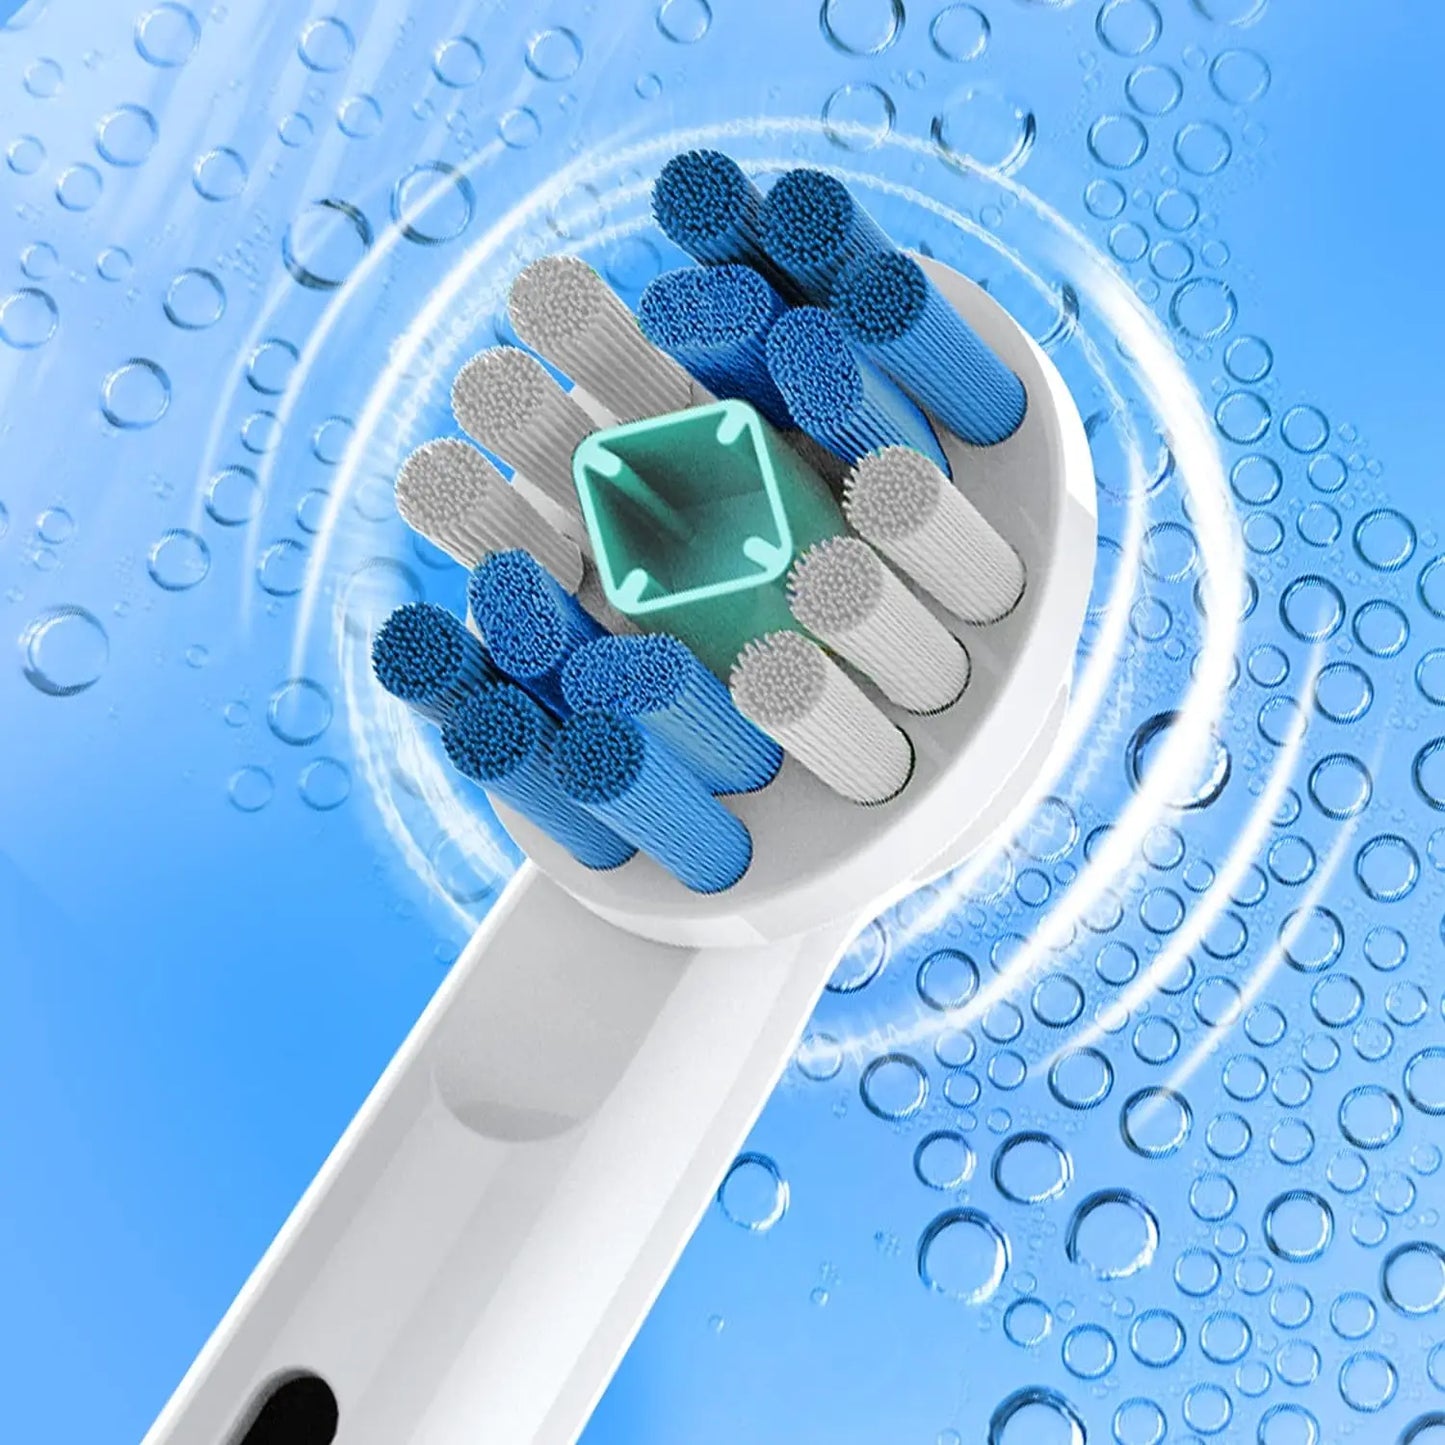 3D White Electric Replacement Toothbrush Heads - Compatible with Most Oral-B Electric Toothbrushes